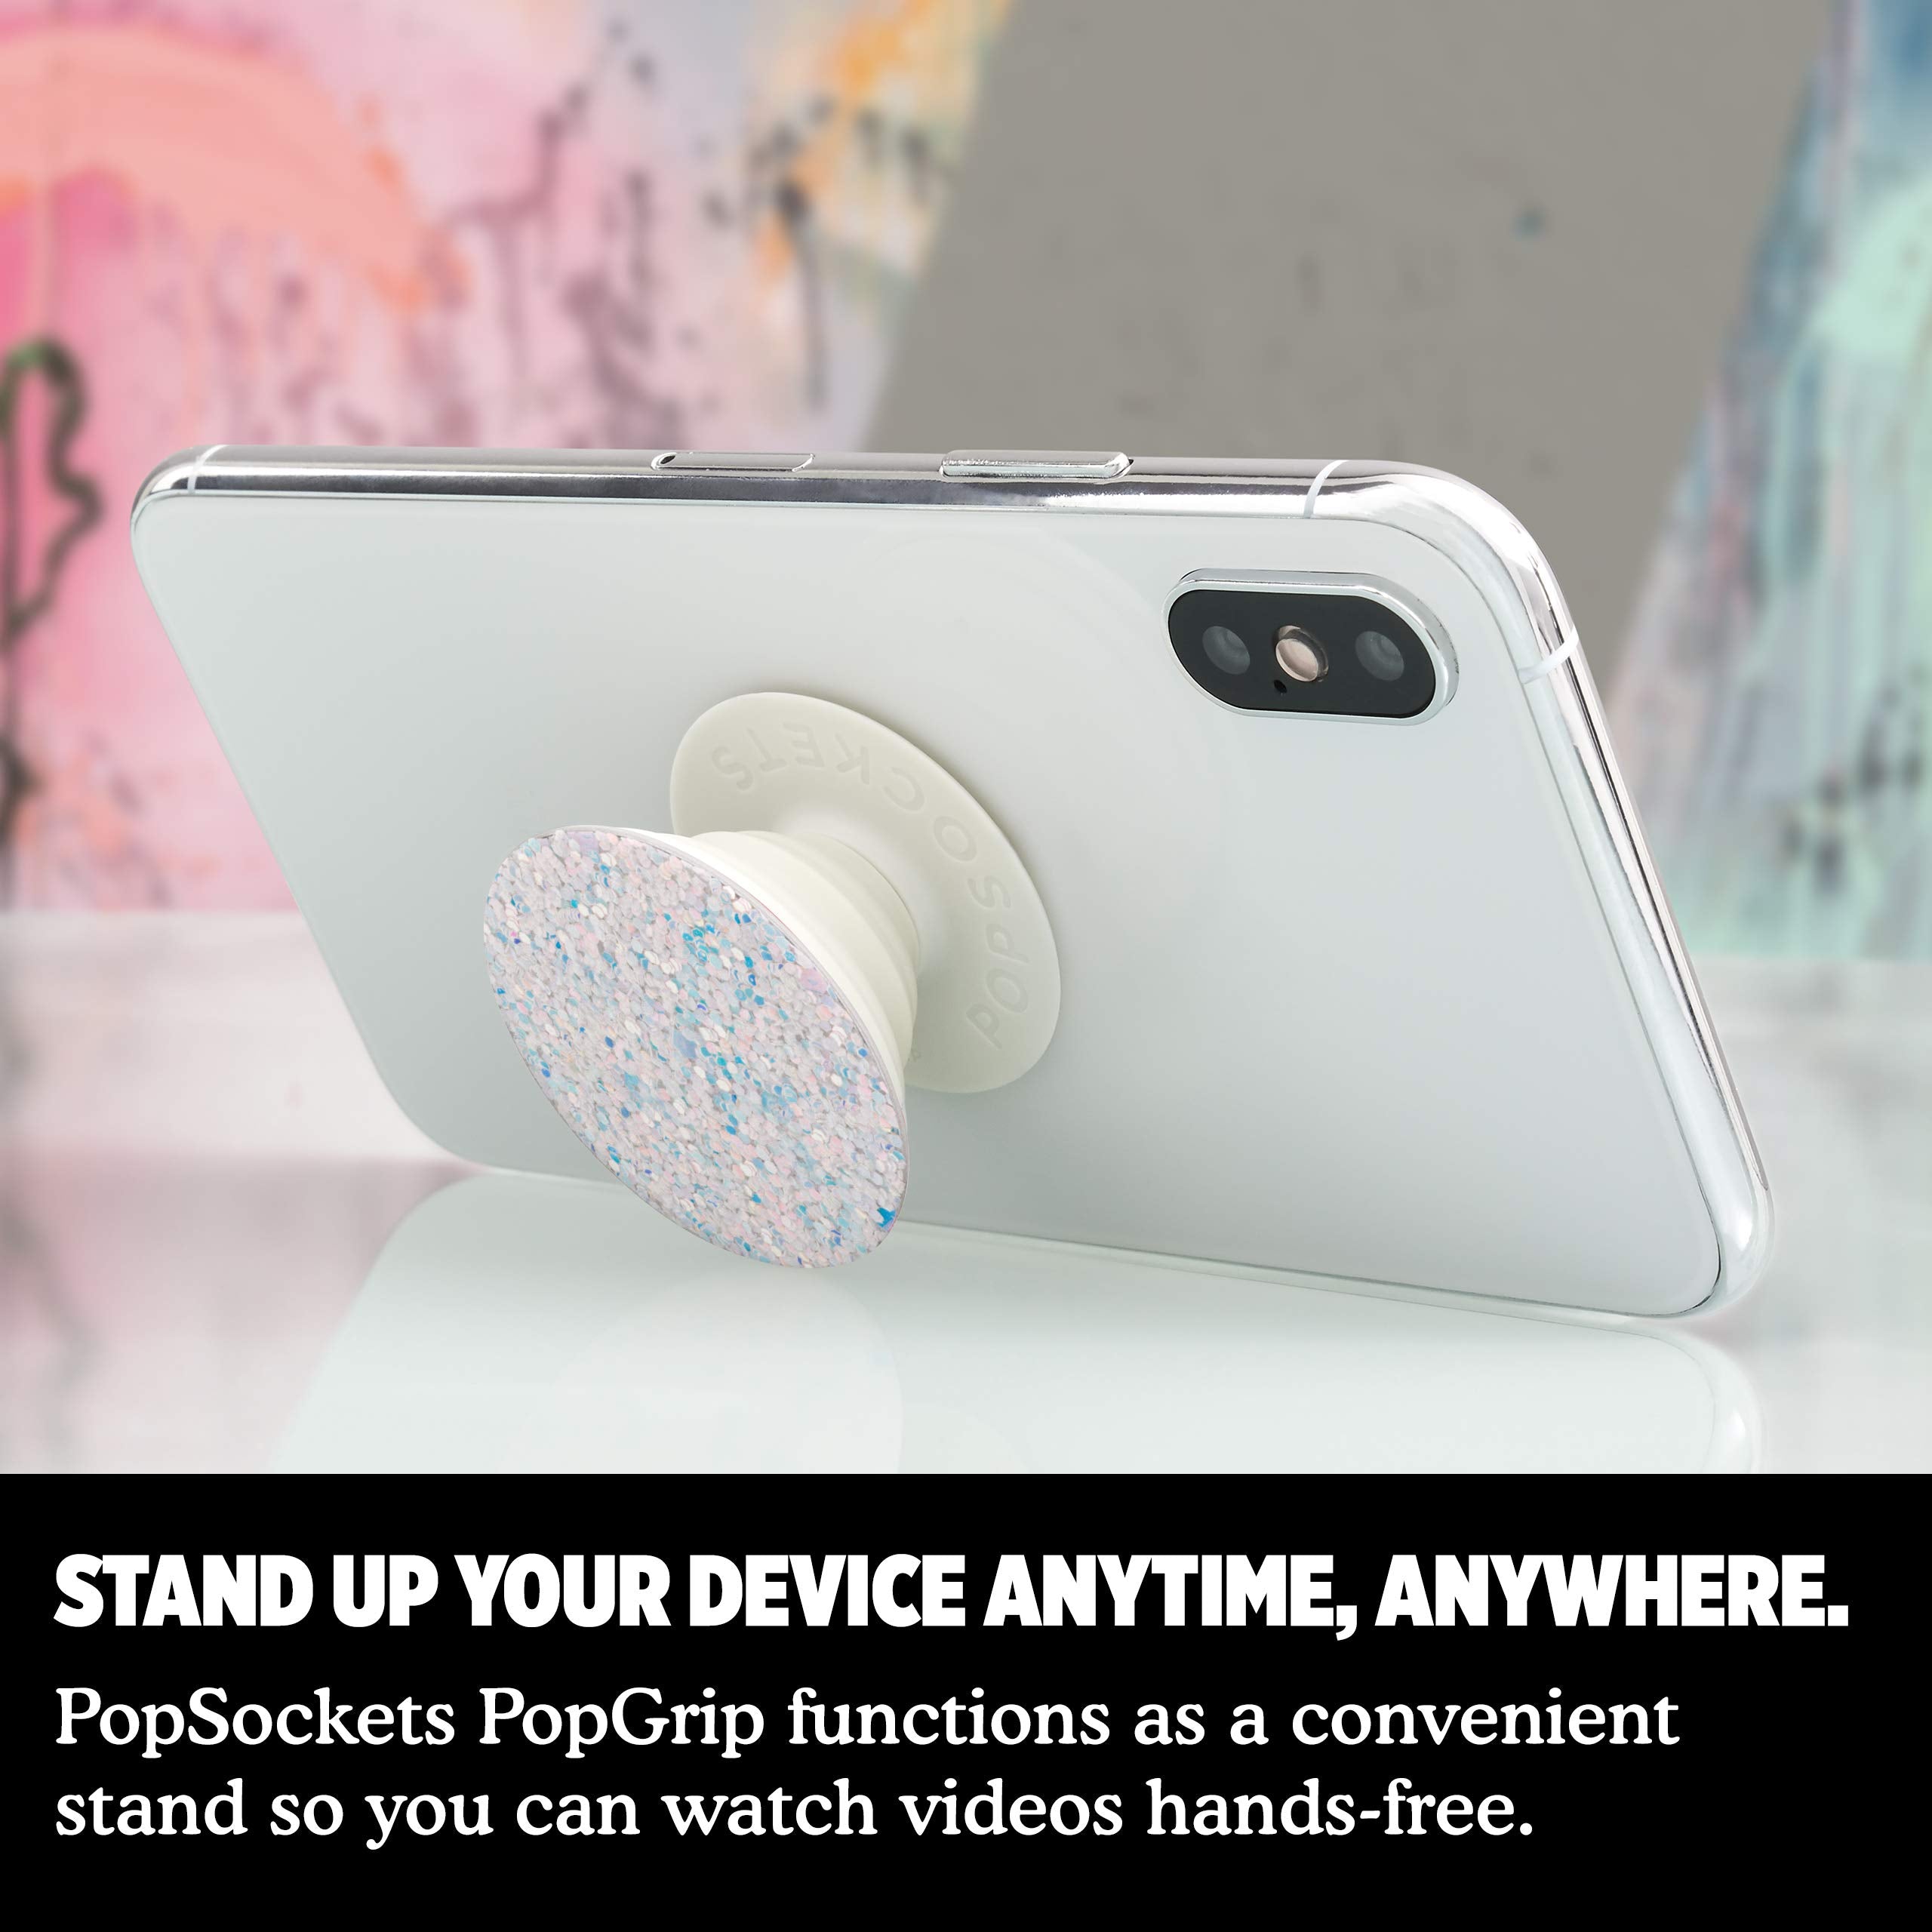 PopSockets PopGrip -All Smartphones and Tablets, Nintendo Switch, Kindle E-reader, Ipad Expanding Stand and Grip with Swappable Top - Sparkle Snow White,Water proof